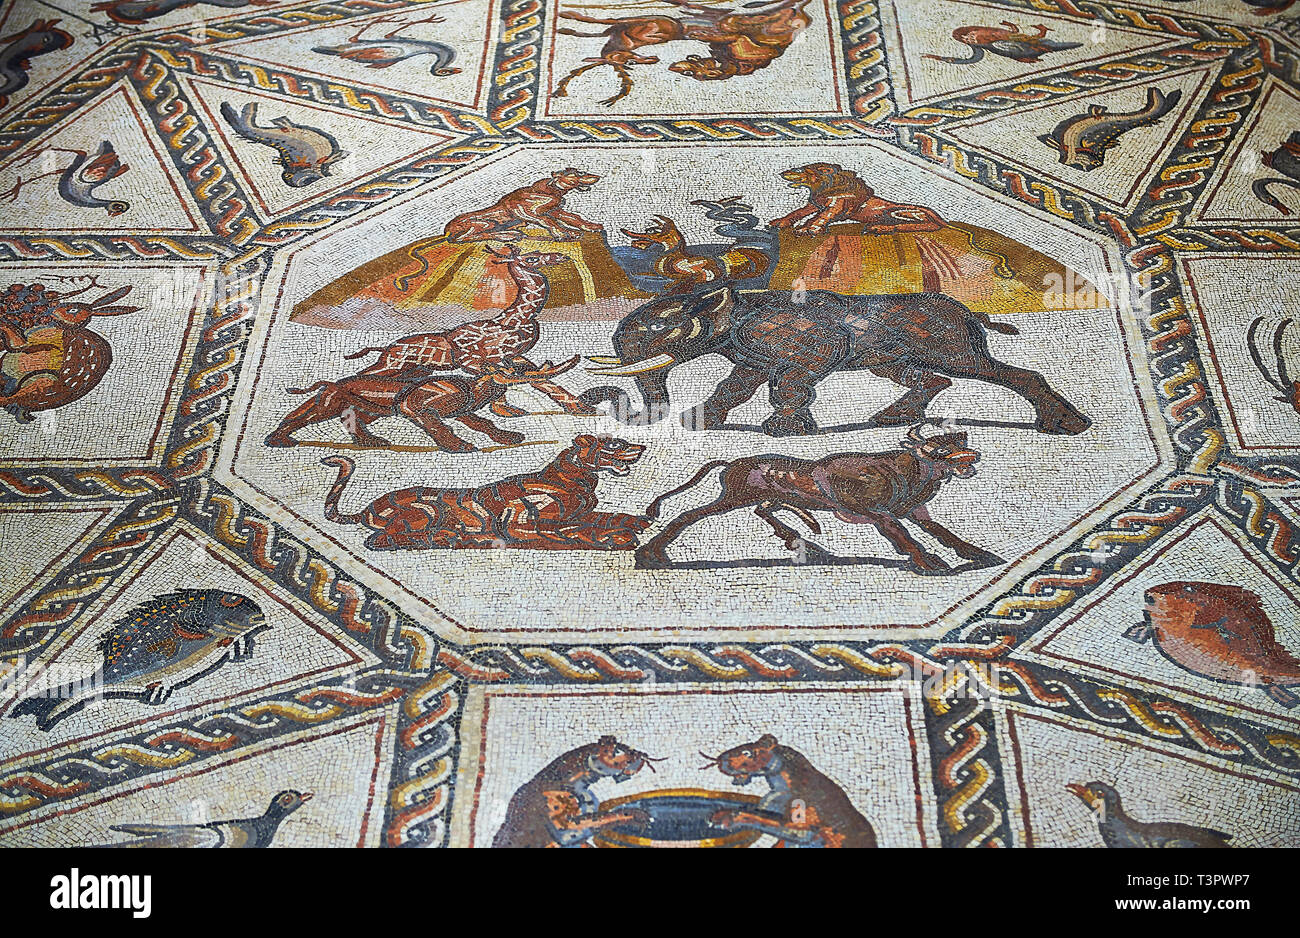 African animals and fish from the 3rd century Roman mosaic villa floor from Lod, near Tel Aviv, Israel. The Roman floor mosaic of Lod is the largest a Stock Photo